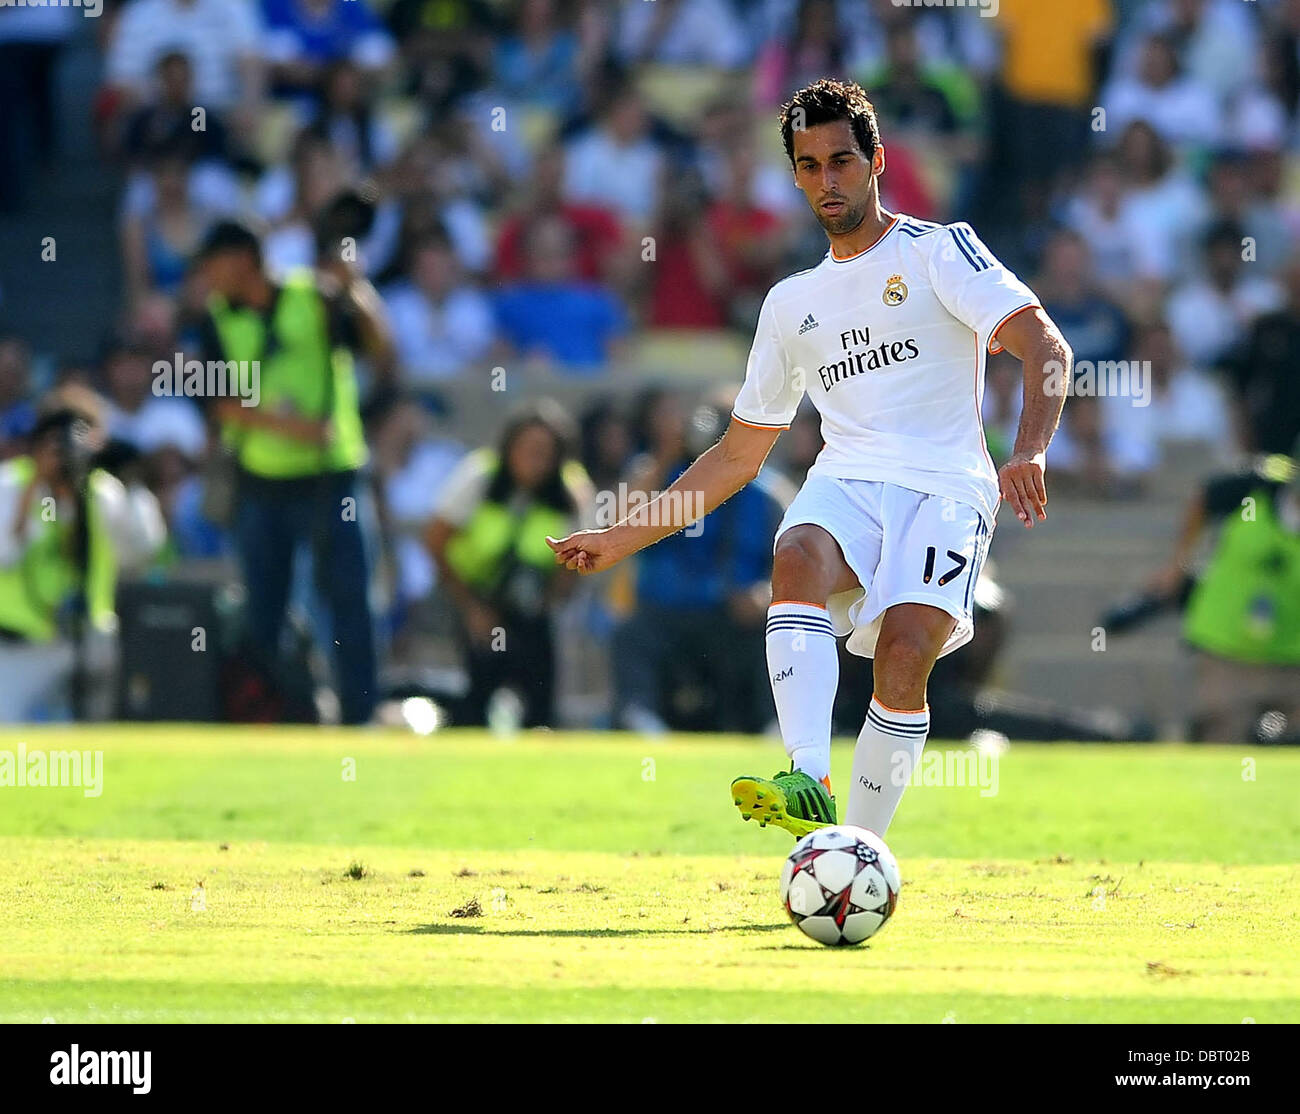 August 3, 2013 Los Angeles, CA.Real Madrid defender Alvaro Arbeloa (17) moves the ball in action during Match 5 of the Guinness International Champions Cup Soccer game between Everton and Real Madrid at Dodger Stadium.Real Madrid defeats Everton 2-1.Louis Lopez/CSM Stock Photo